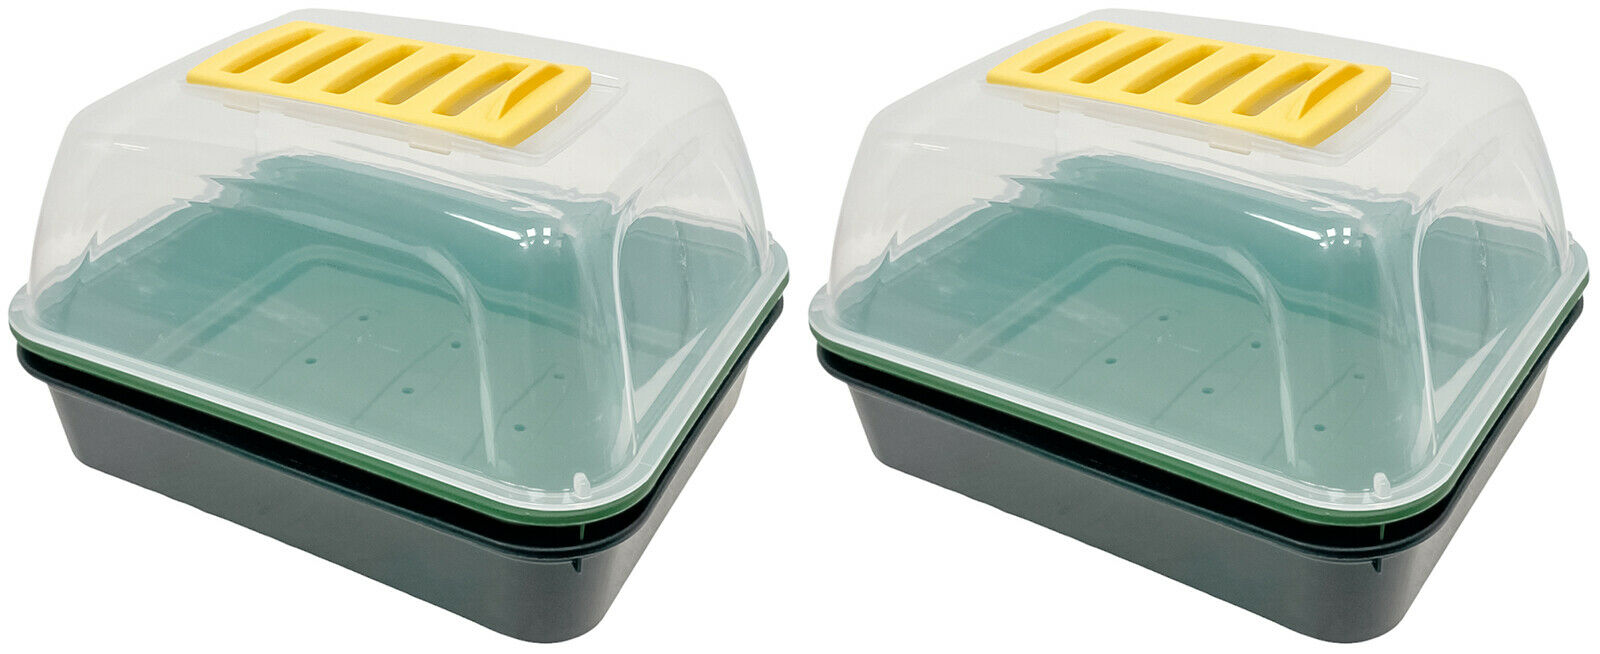 2x Small Plant Propagator Set Shatter Resistant Lid Seed Germination Plant Grow